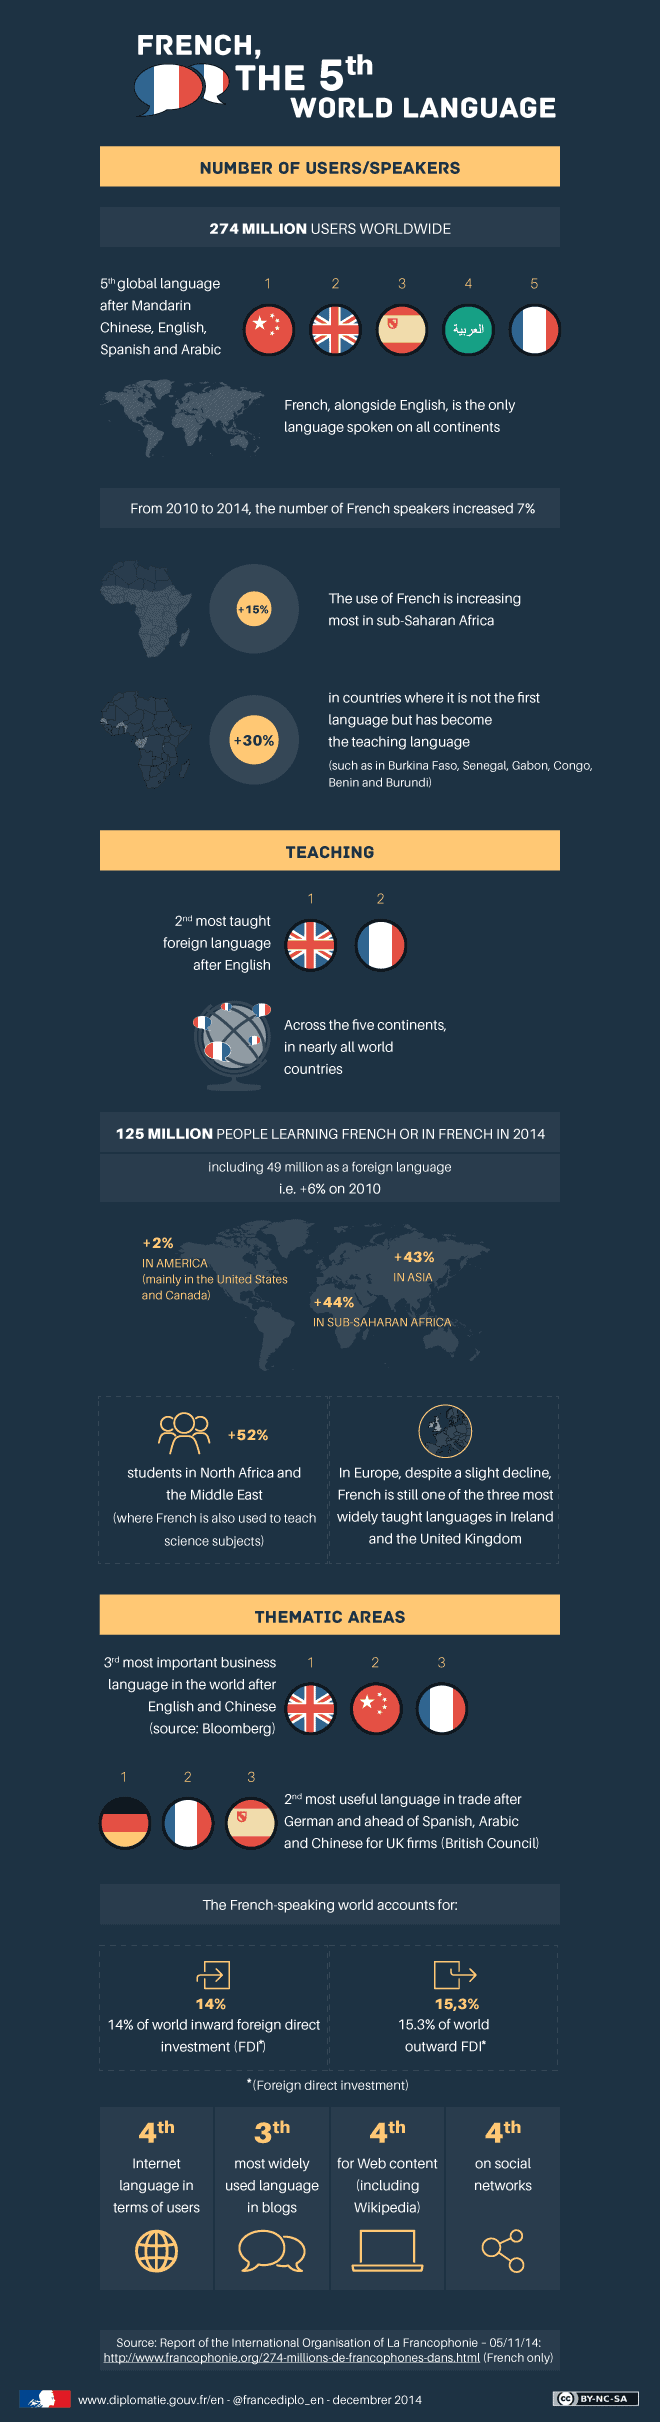 French the 5th important world language infographic